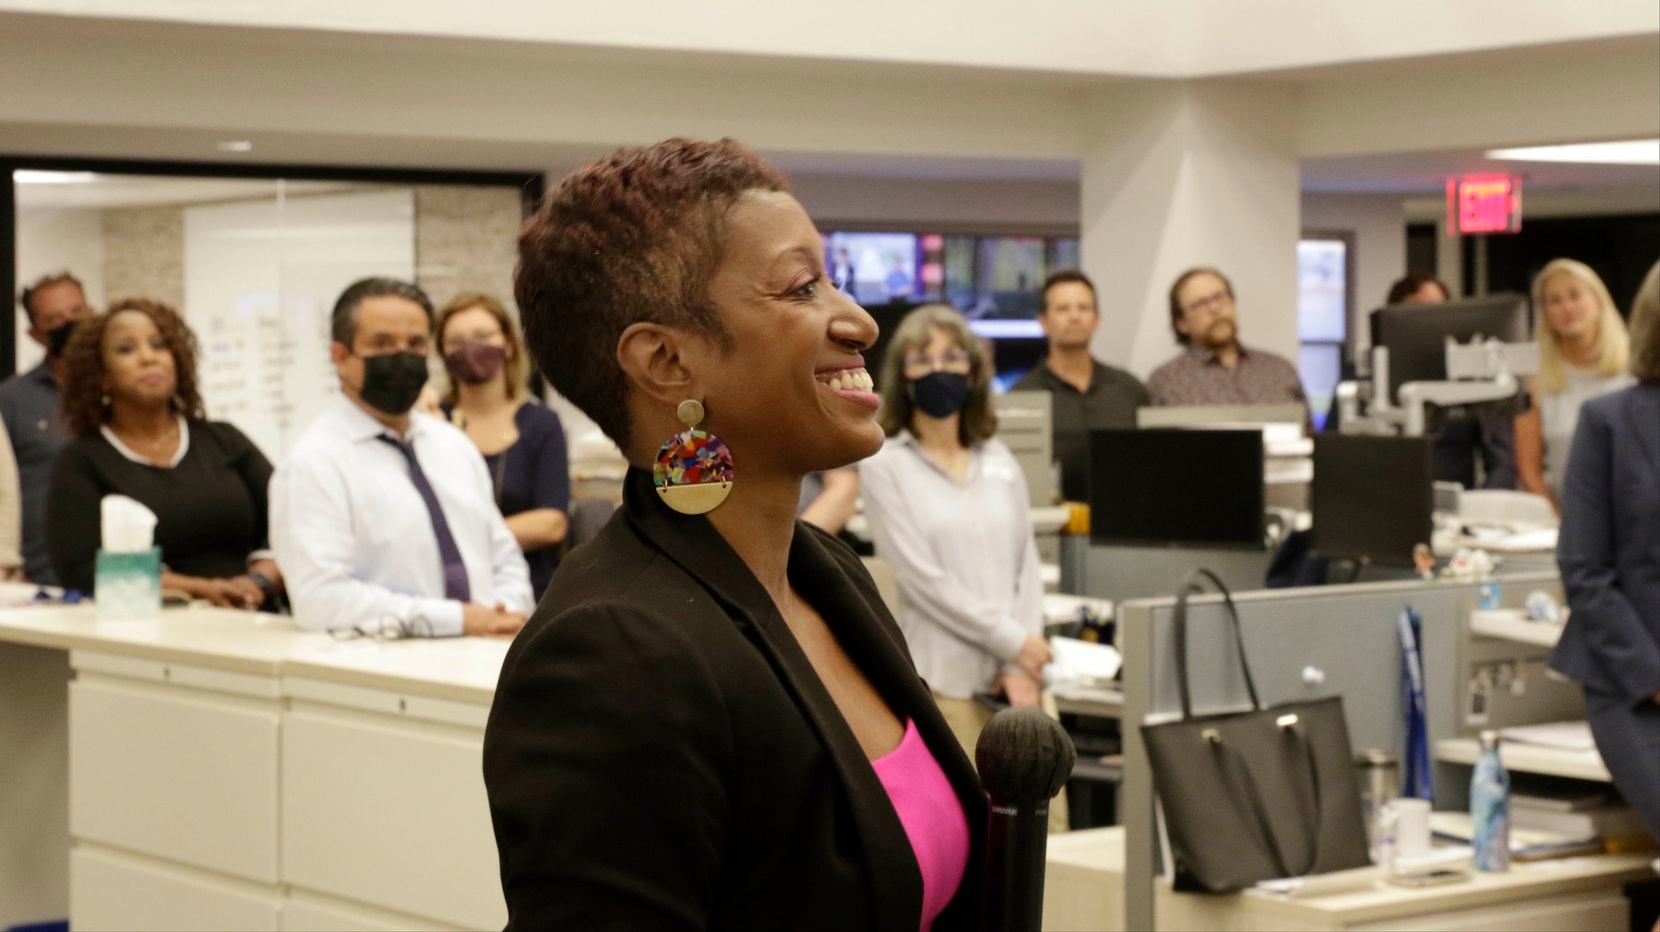 Katrice Hardy, The Dallas Morning News' executive editor, talks to the newsroom on July 21, 2021, in Dallas, Texas. Hardy, 47, joins The News next month as executive editor. She’s currently executive editor at the Indianapolis Star, which won this year’s Pulitzer Prize for national reporting, and Midwest regional editor for the USA Today Network. (Irwin Thompson/Staff Photographer)